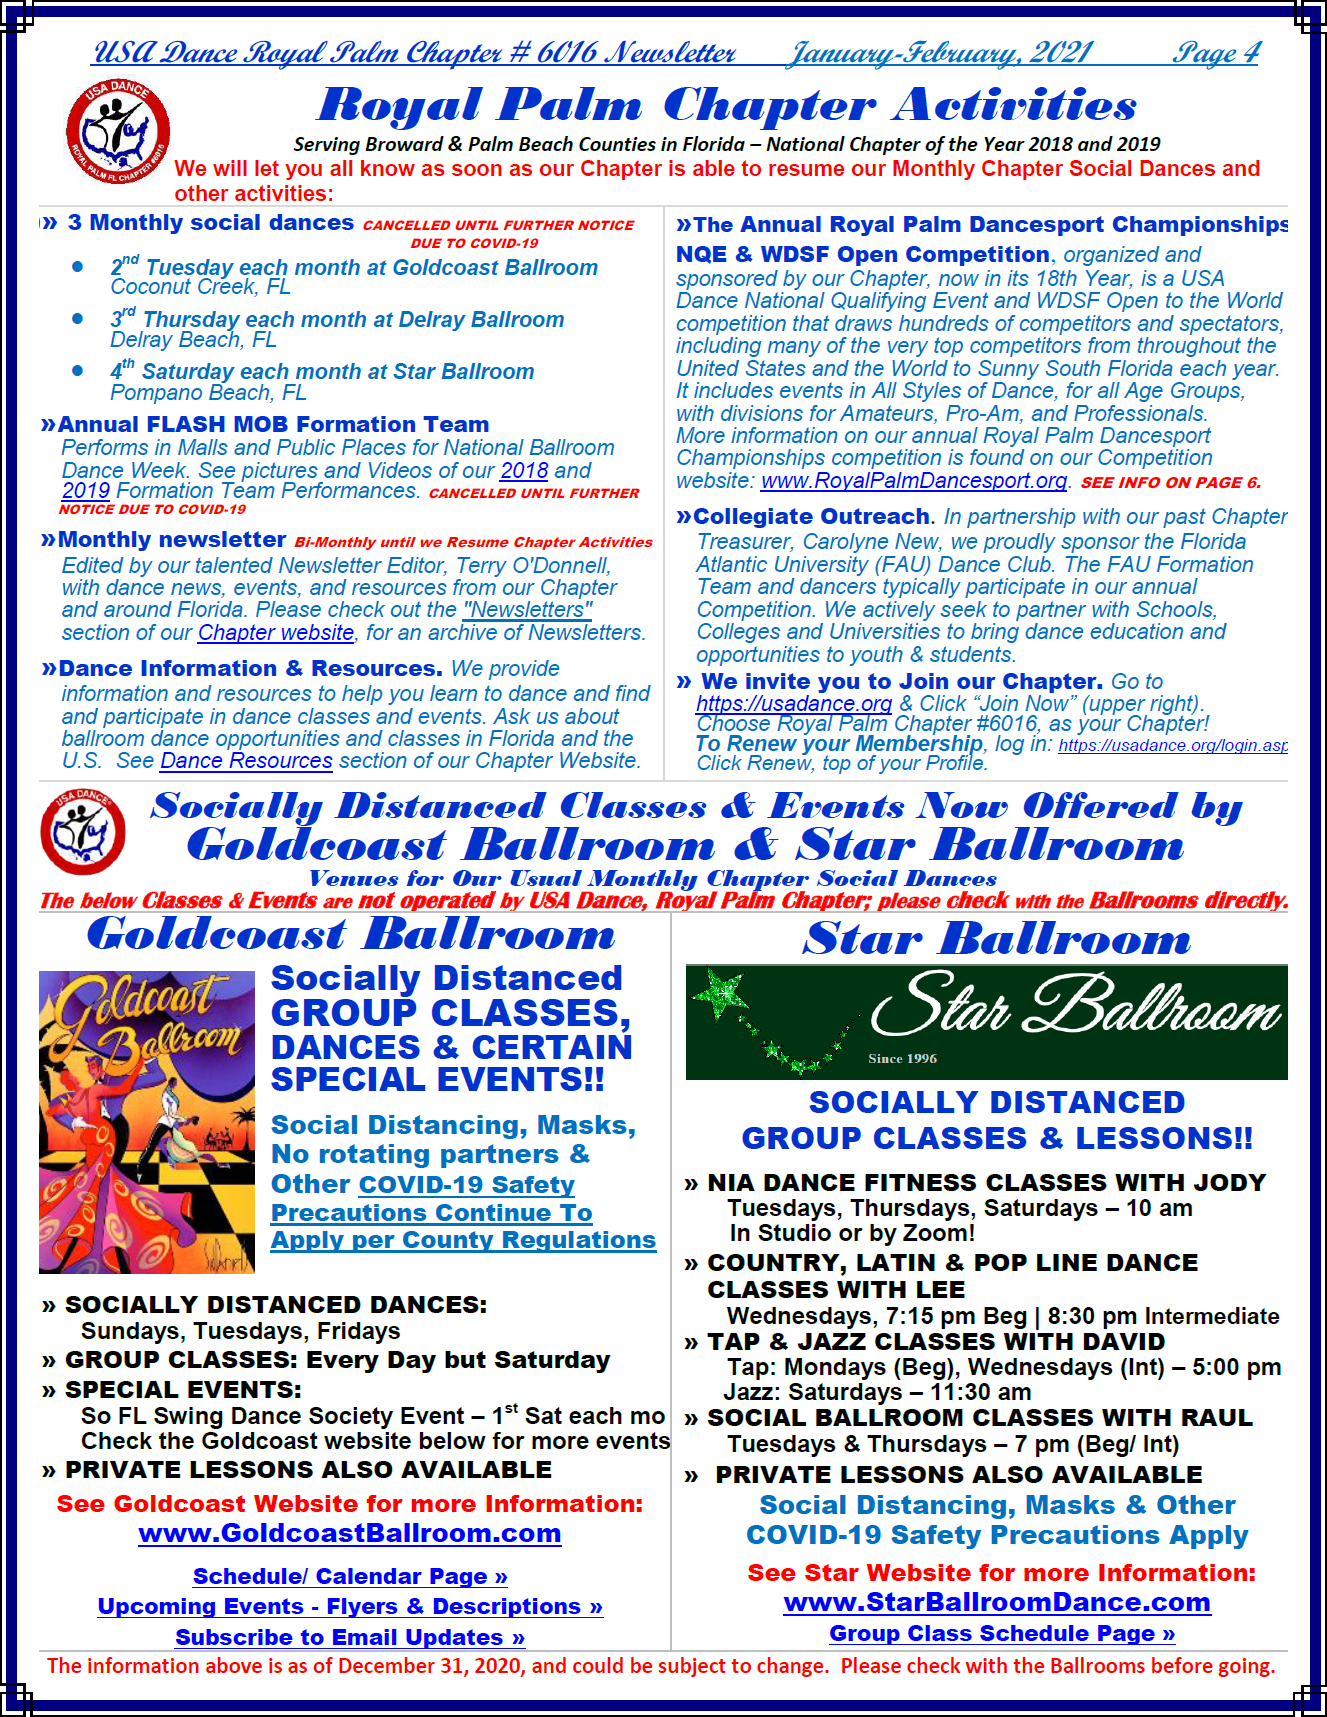 Royal Palm Chapter 6061 - Jan-Feb 2021 Newsletter - page 4